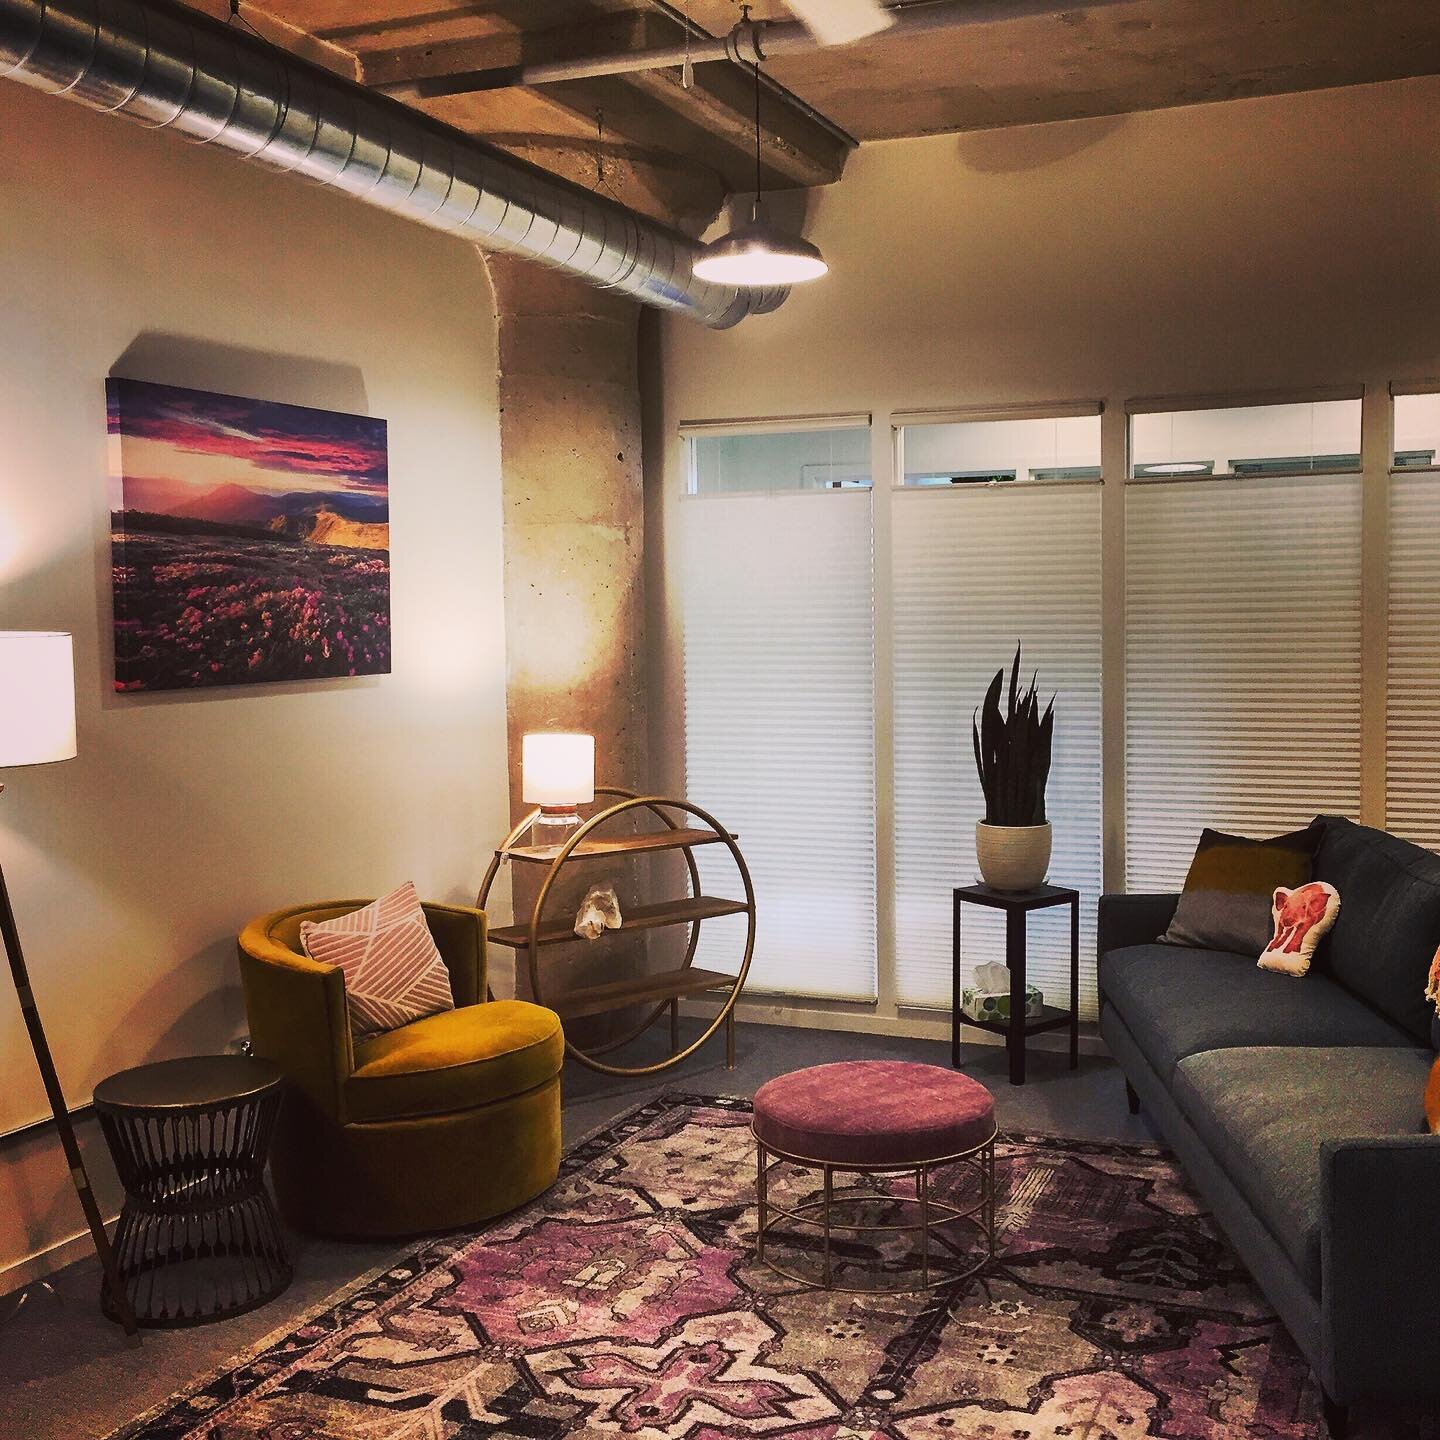 Sometimes called the &ldquo;purple room&rdquo;, love my choice of color and round objects along with the industrial feel of the architecture. This room is easily cozied up for individual therapy or can be our group meeting space. It&rsquo;s also know